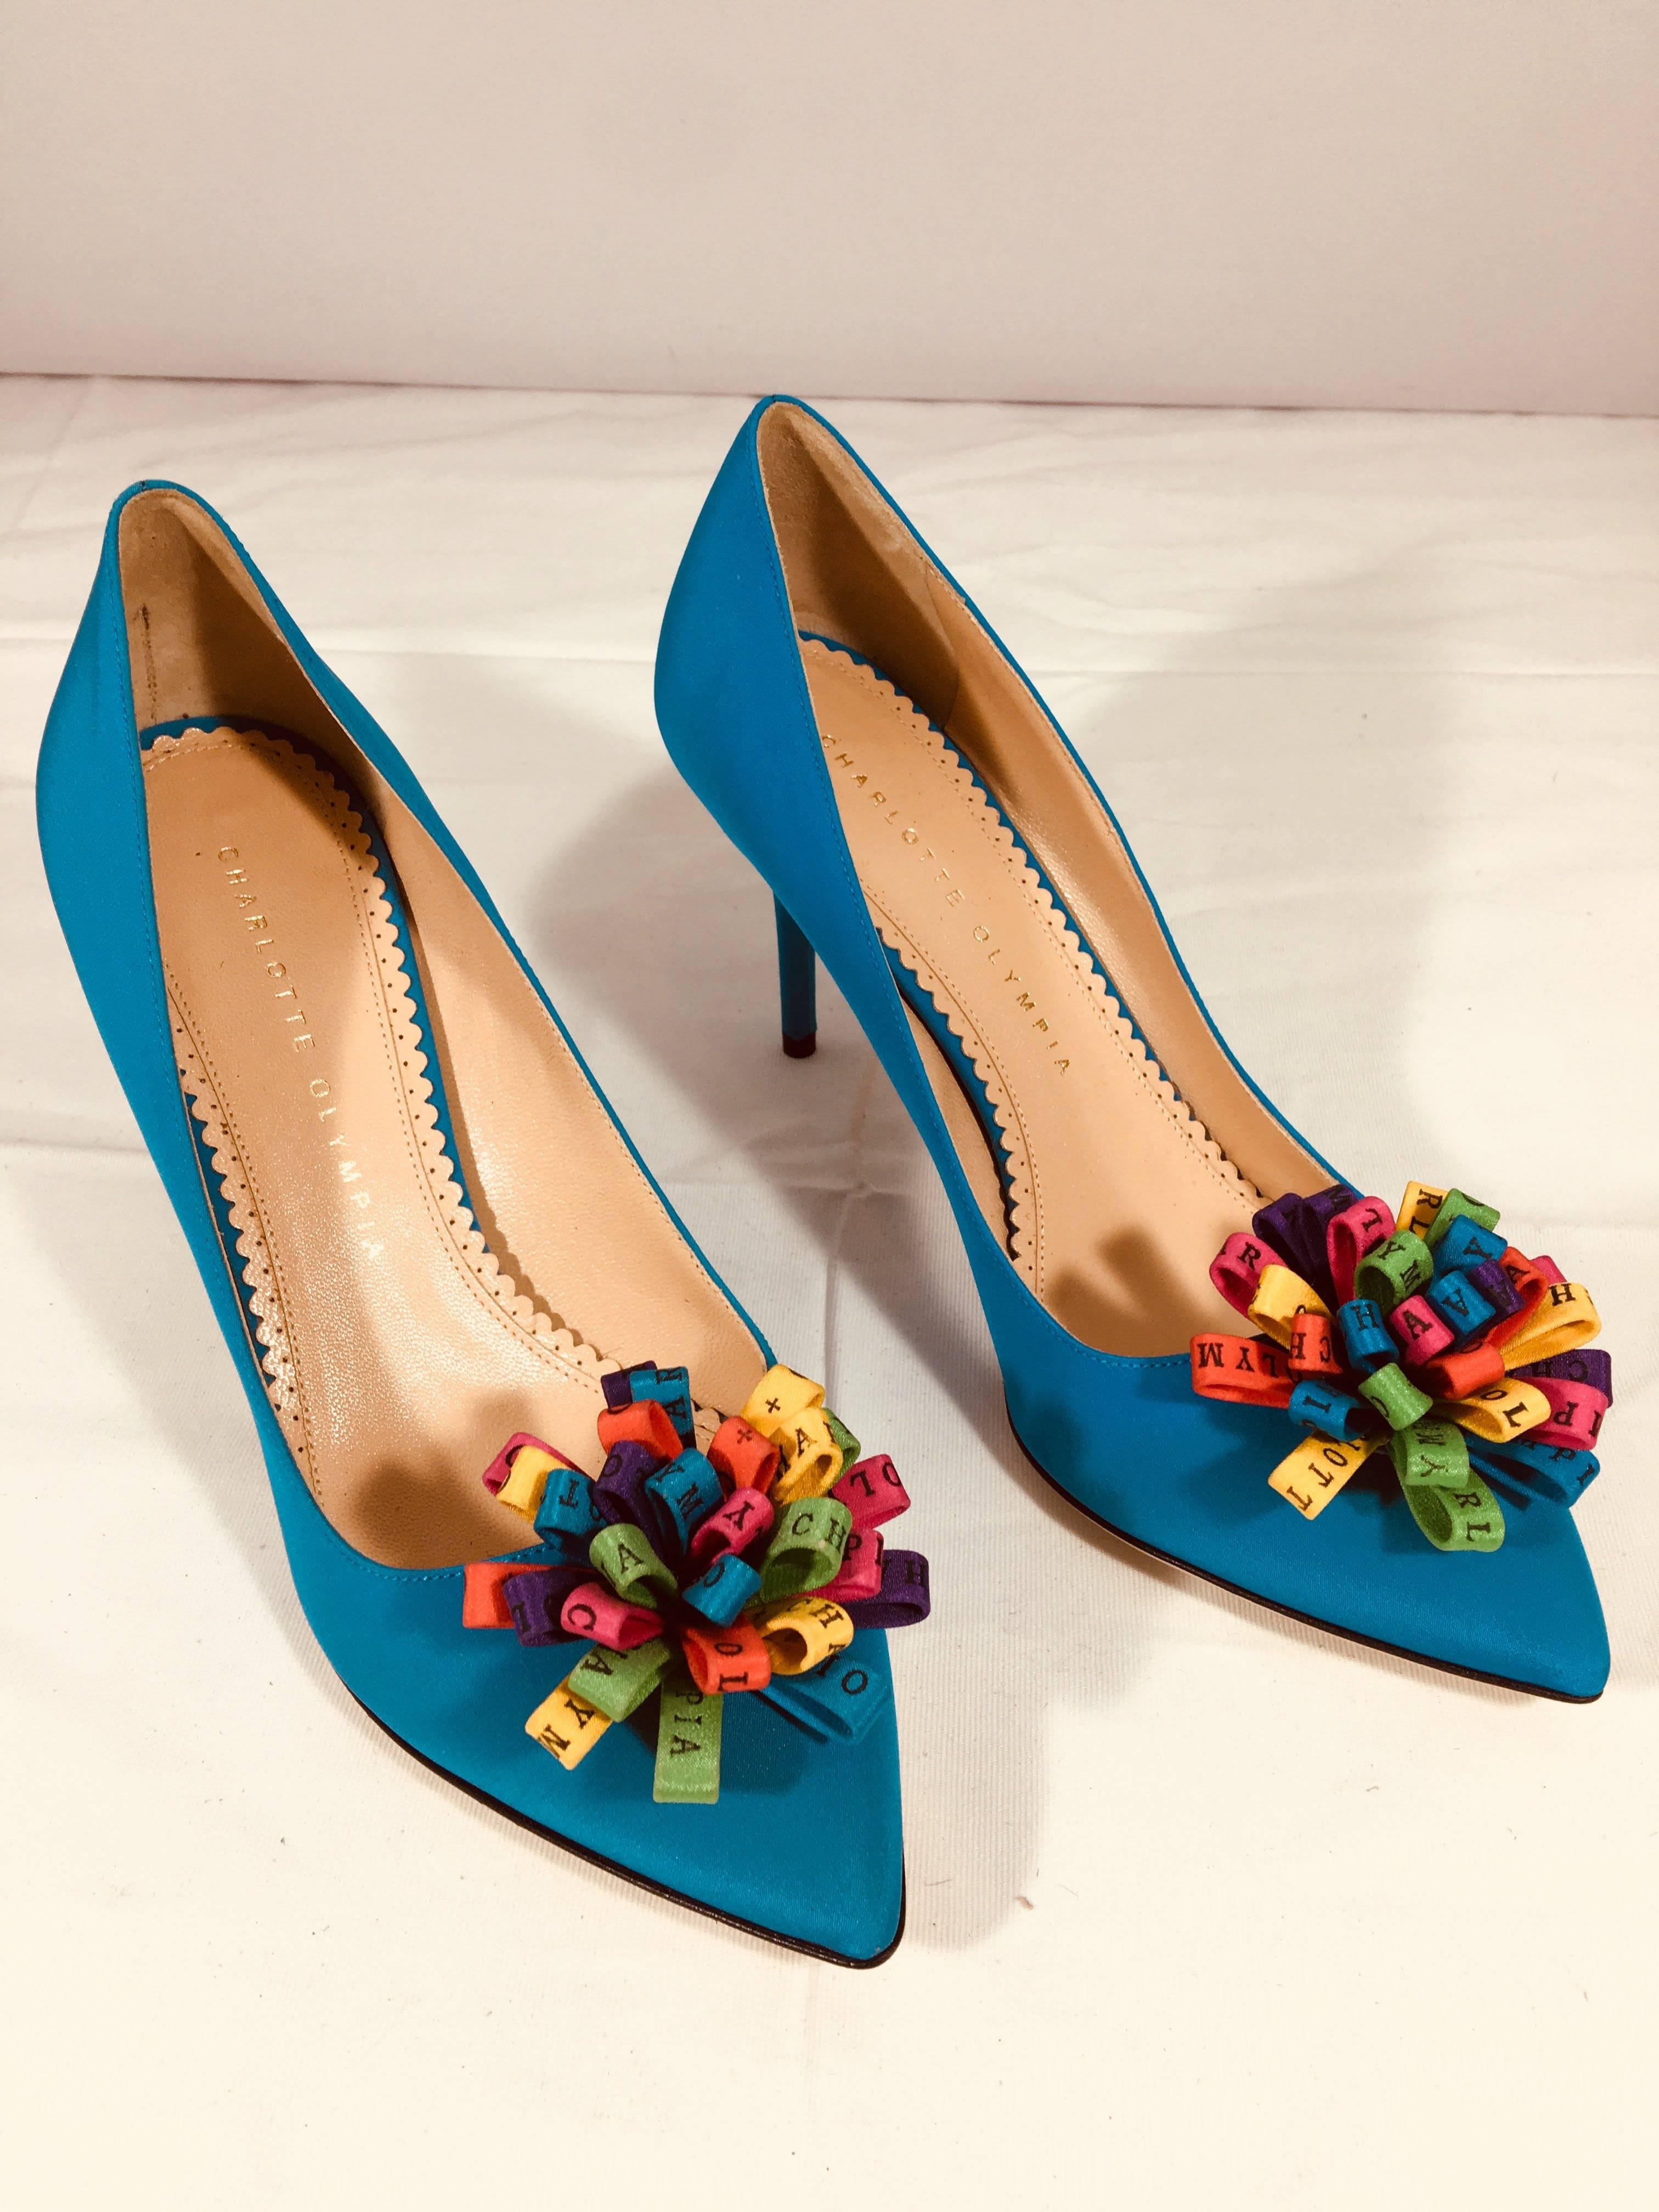 Charlotte Olympia Blue Satin Pointed Toe Heels with Multi-Color Pom Poms at Toe.